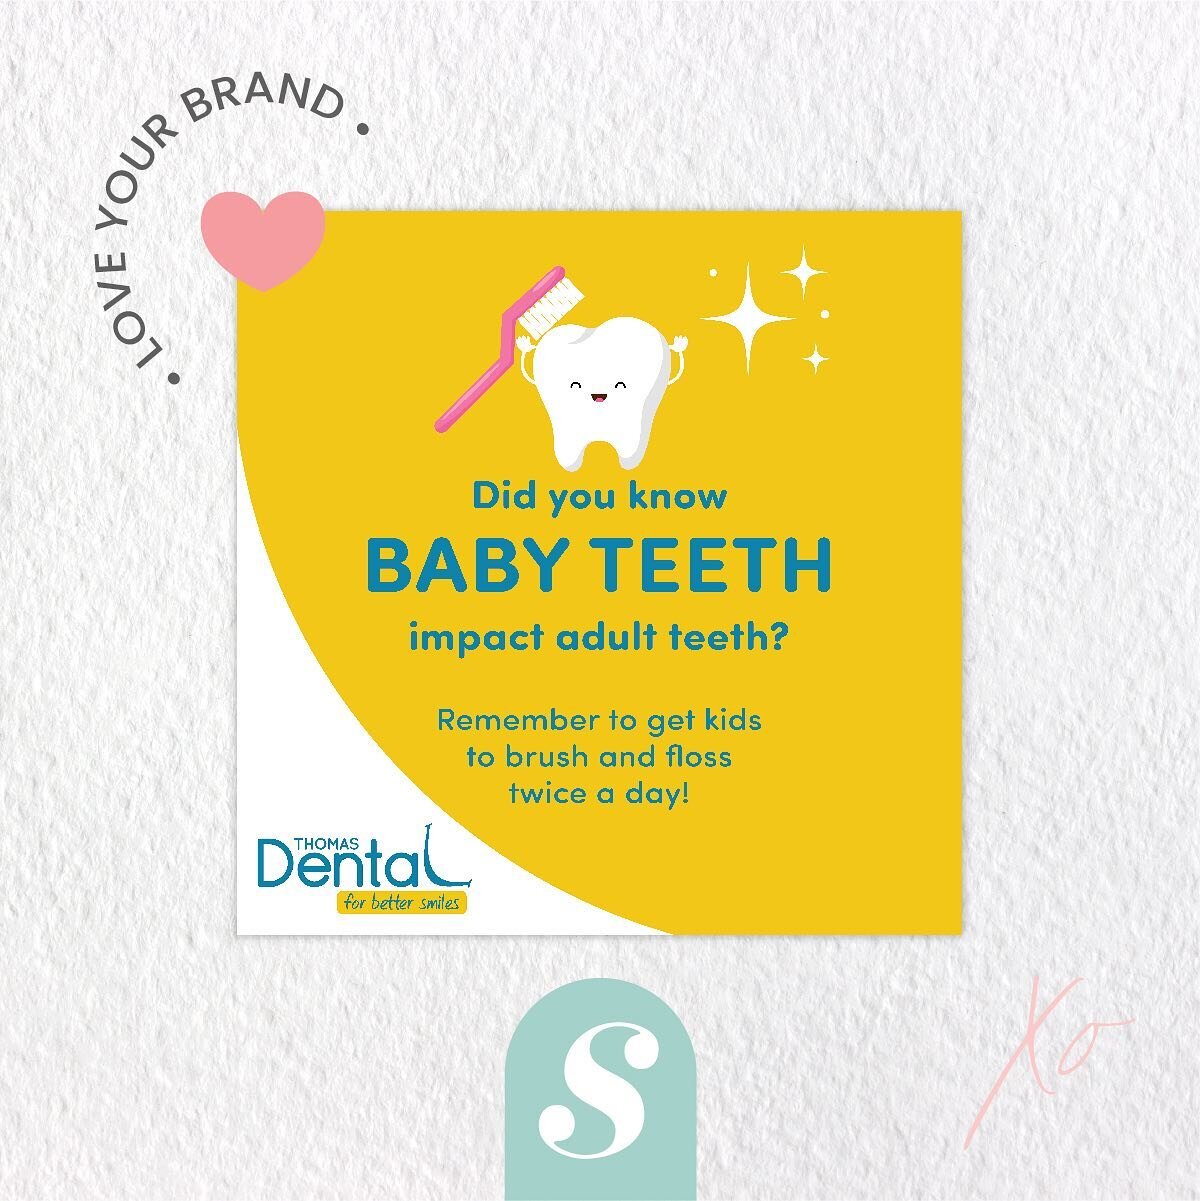 ✨Happy Dental week! ✨

Thomas Dental knows the importance of kids brushing their teeth and are super excited to get their message across in their fun new social media graphic. 

#pediatricdentistmelbourne
#pediatricdentist
#dentaldesign
#graphicdesig